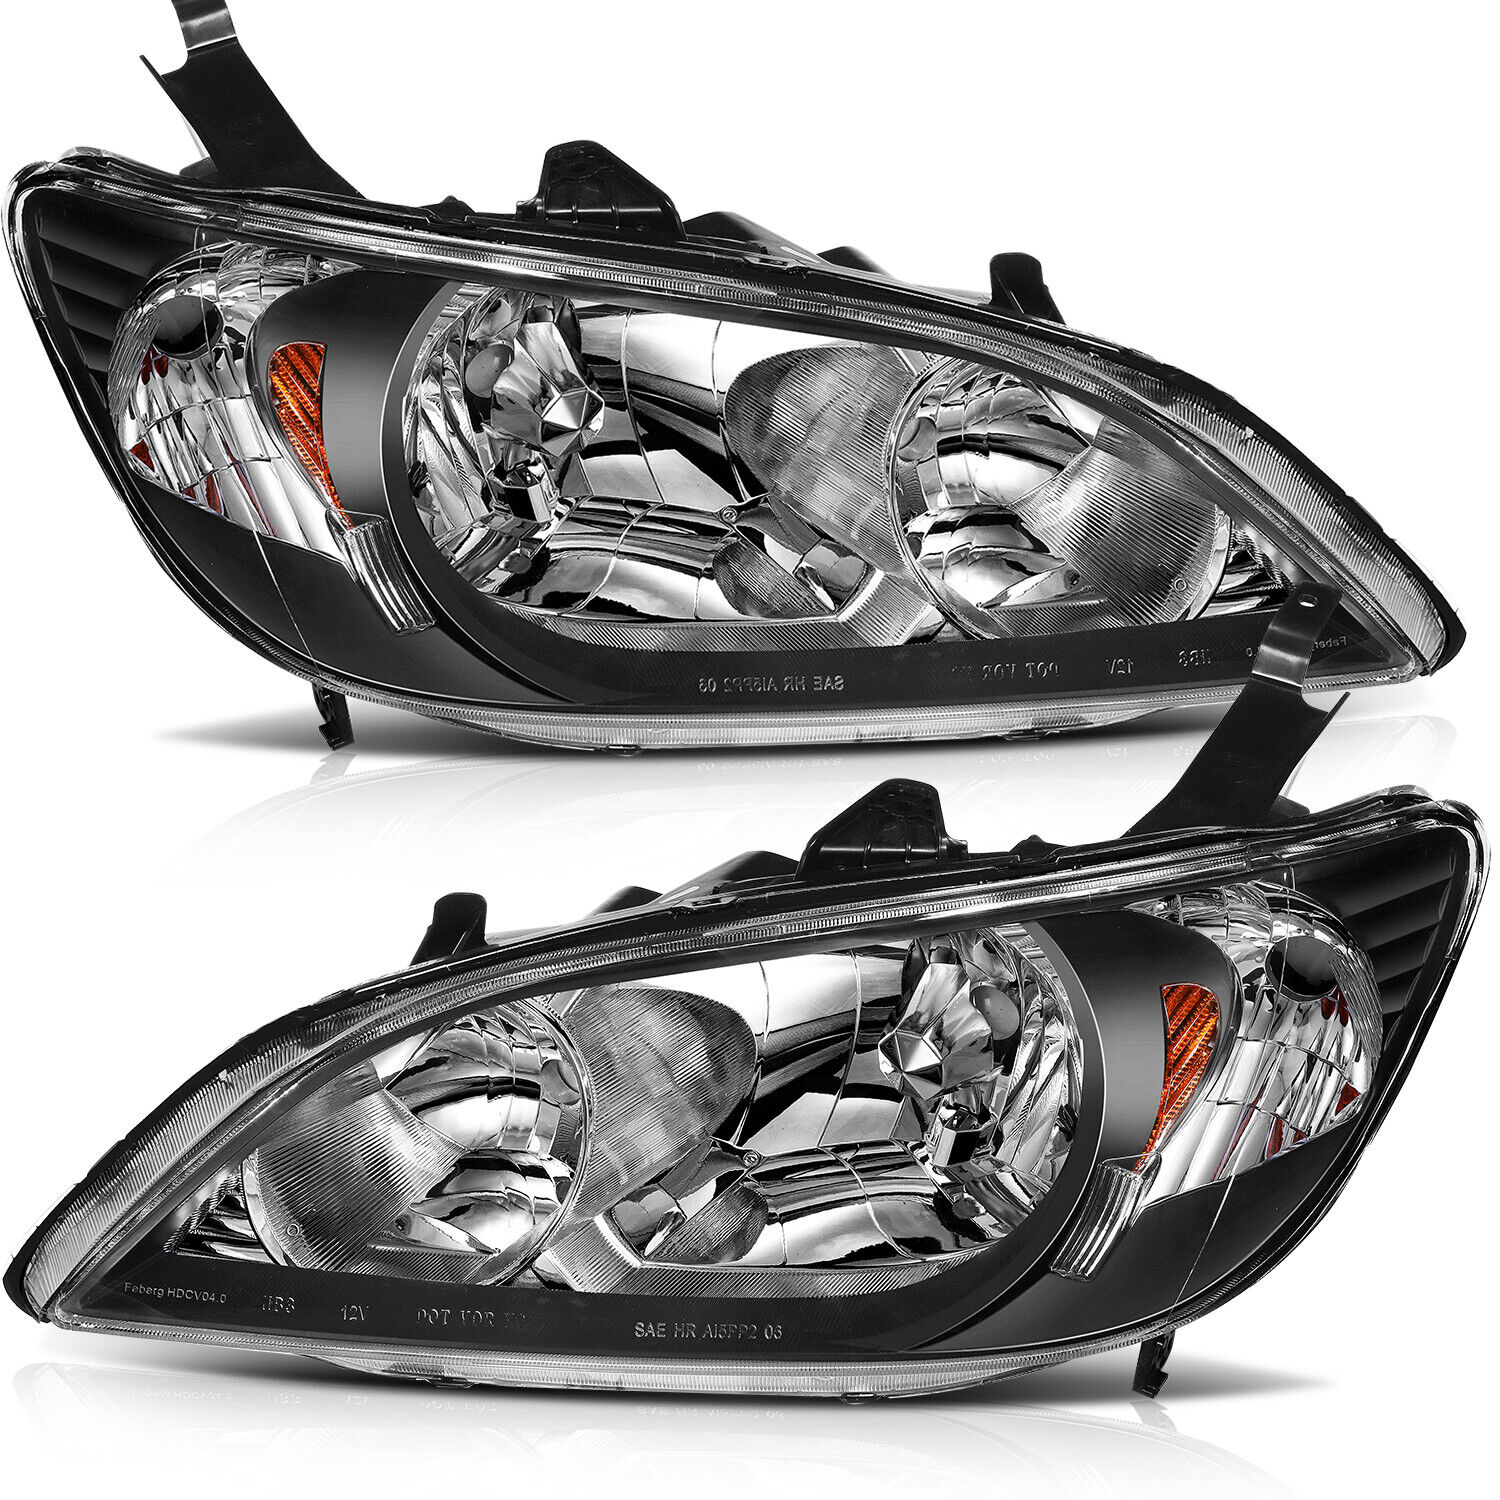 For 2004-2005 Honda Civic Sedan/ Coupe Front Left & Right Headlights Assembly